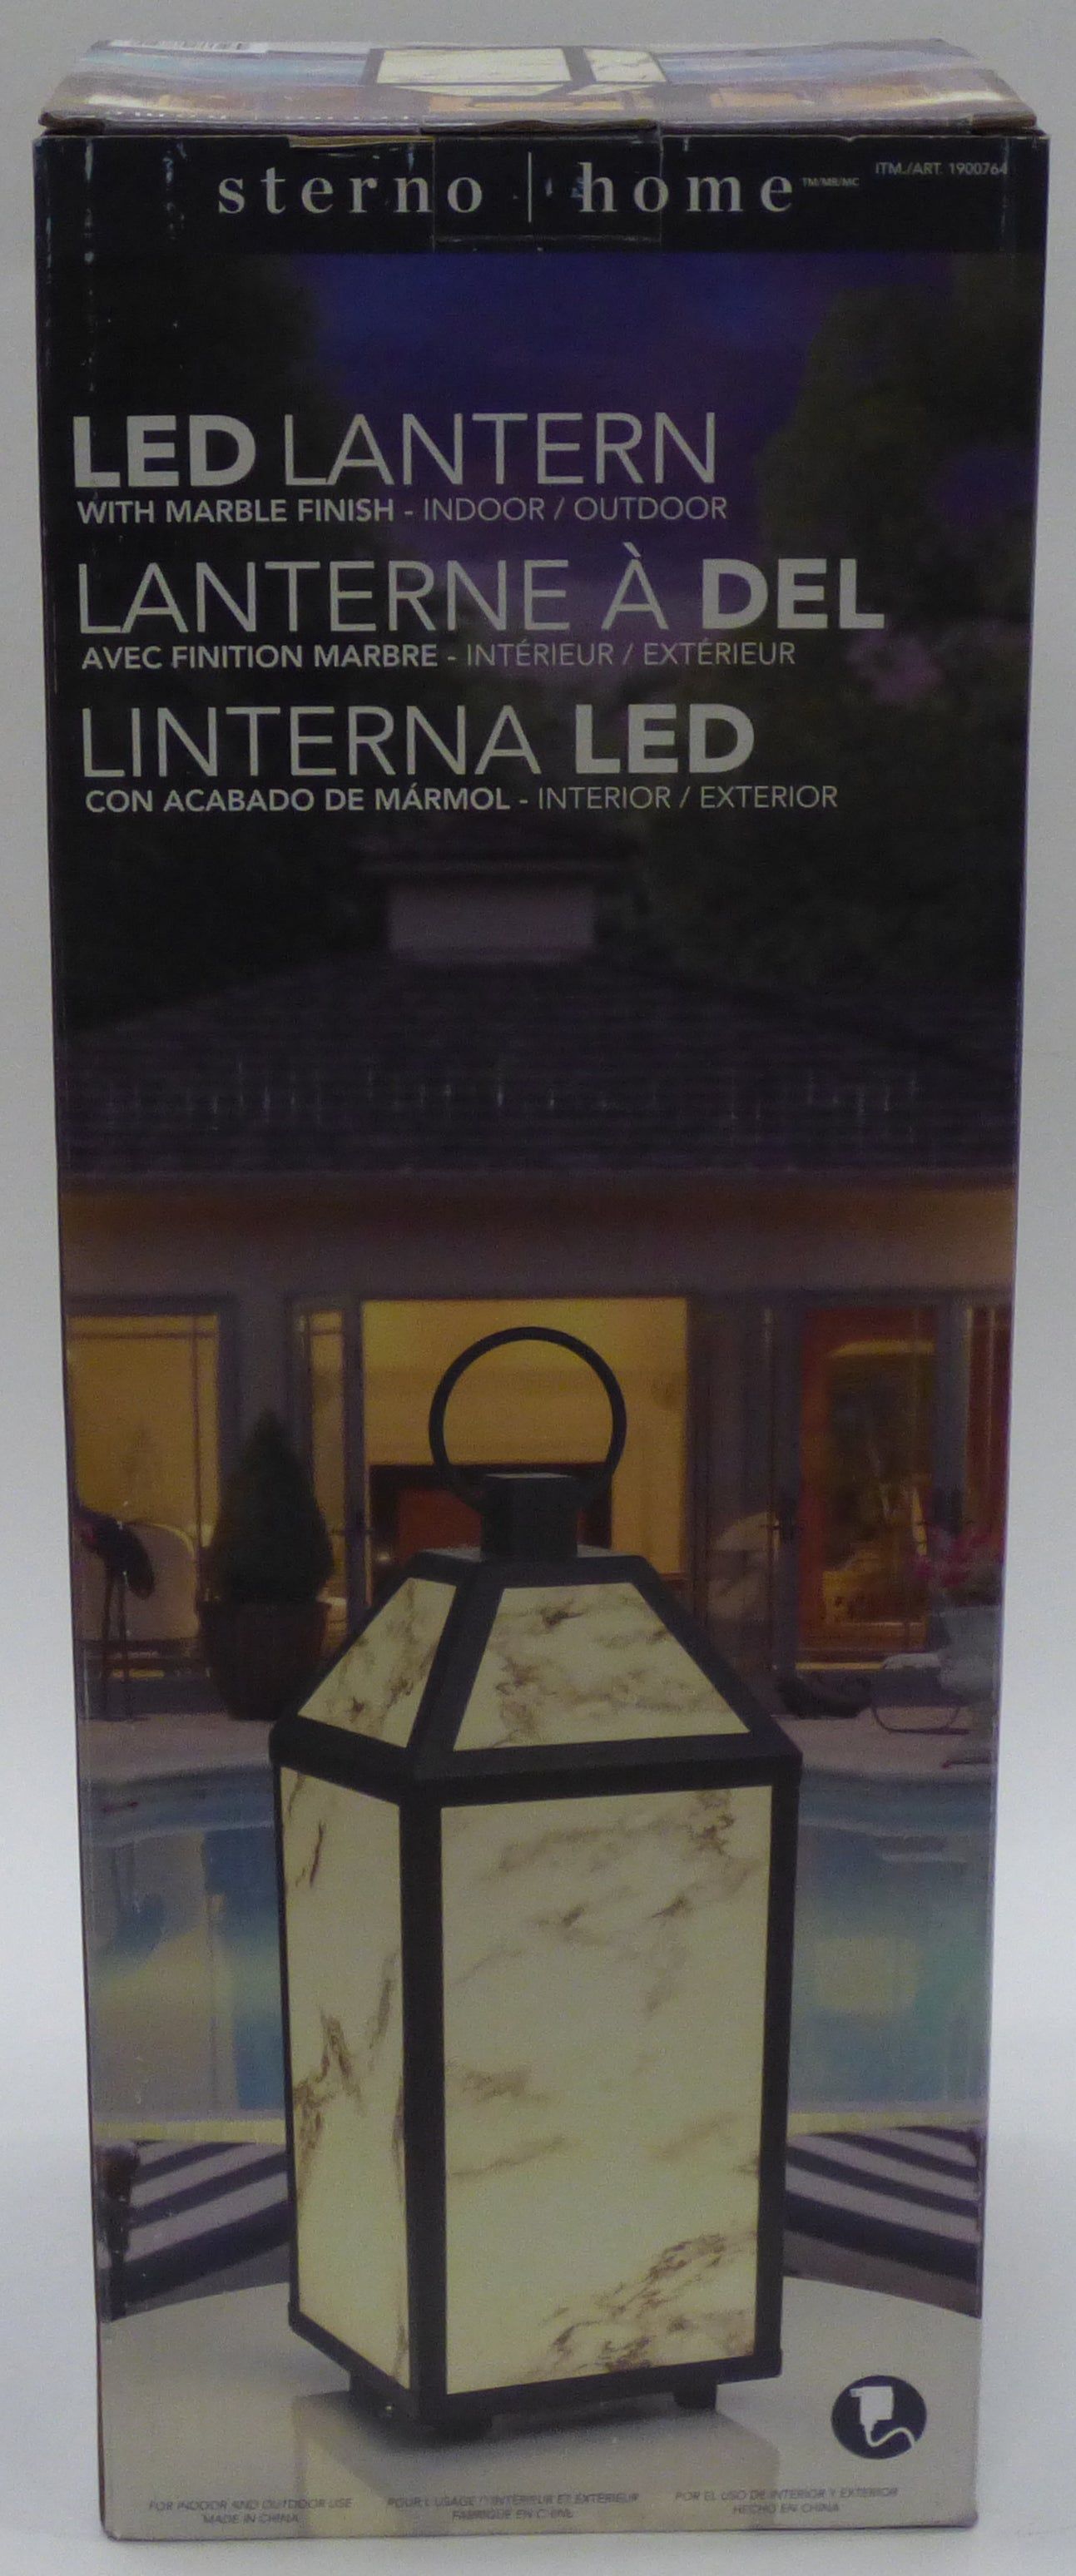 sterno home led lantern with marble finish retail box rear